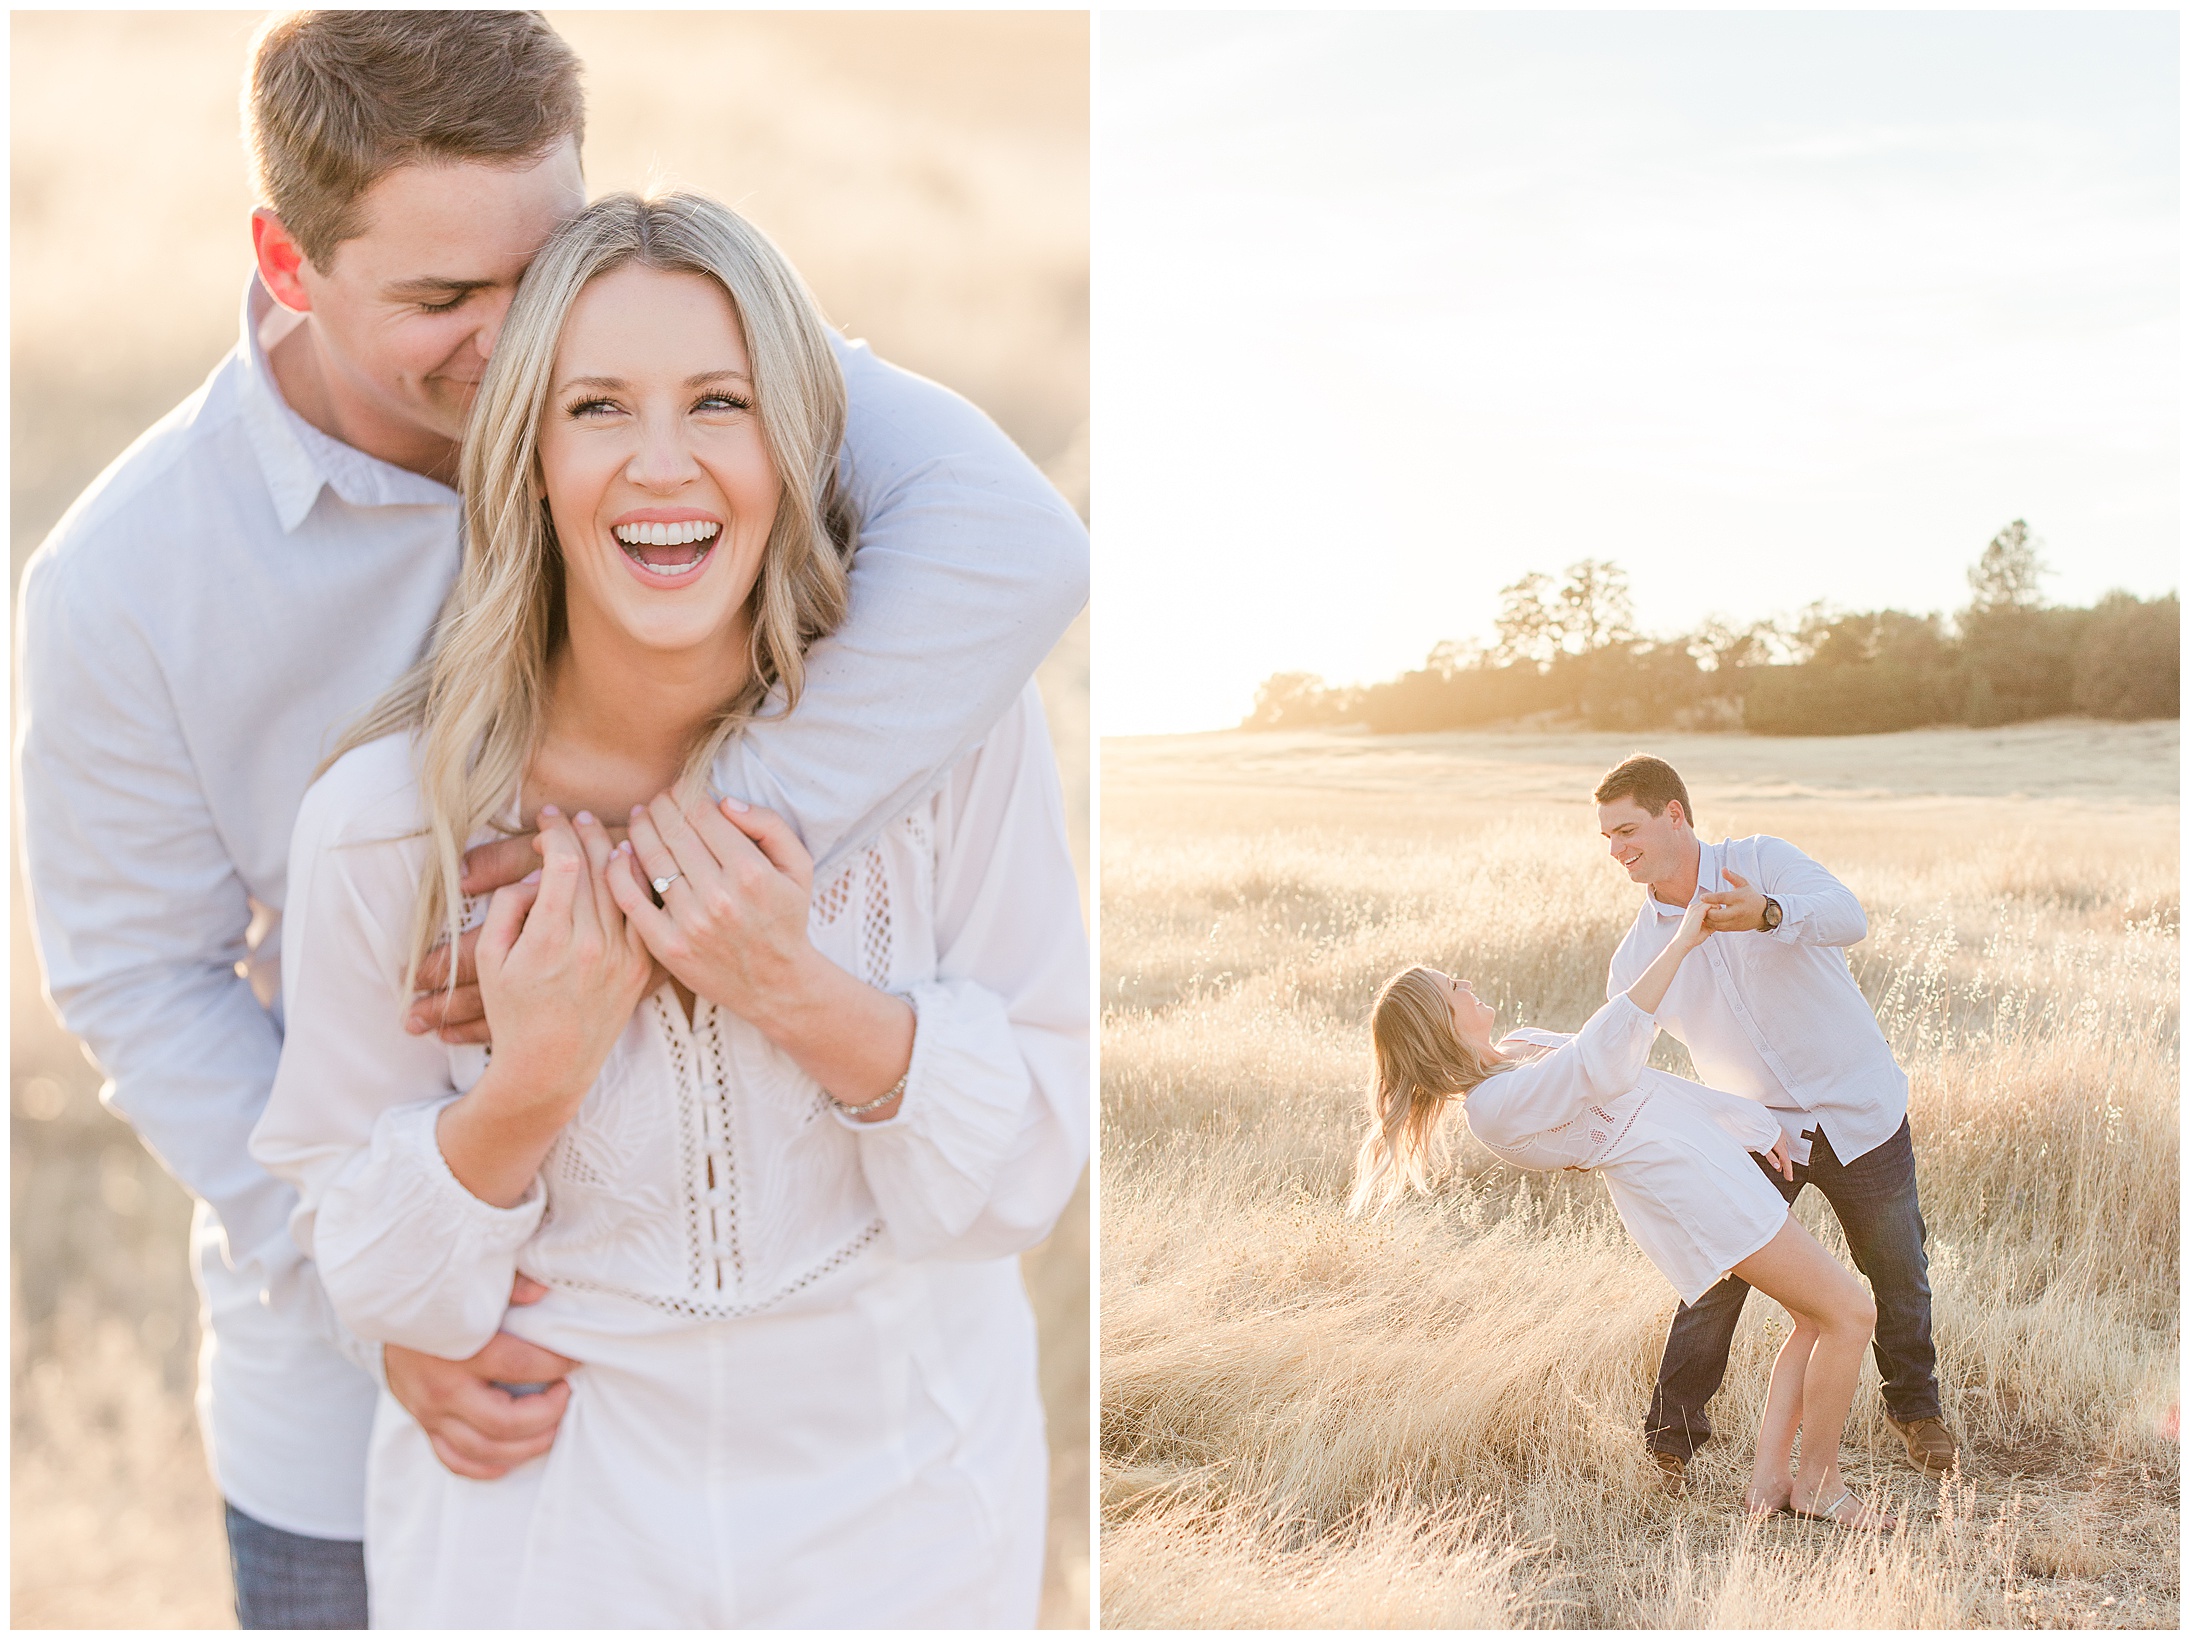 Upper Bidwell Park Chico California Fall Engagement Session Champagne,